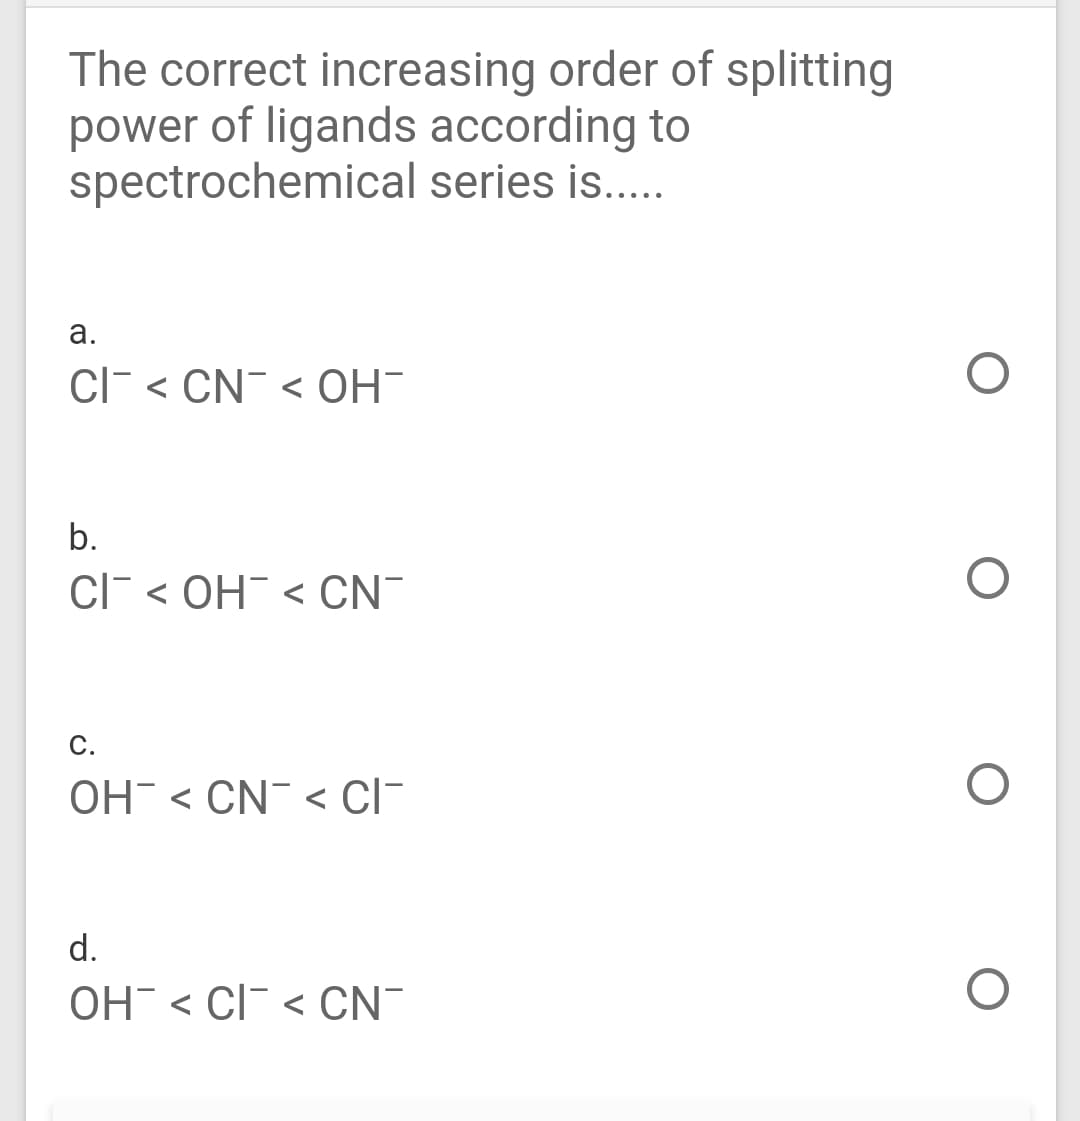 The correct increasing order of splitting
power of ligands according to
spectrochemical series is..
а.
ClF < CN¯ < OH
b.
ClF < OH < CN
С.
OH- < CN¯ < CI-
d.
OH < CI < CN-
